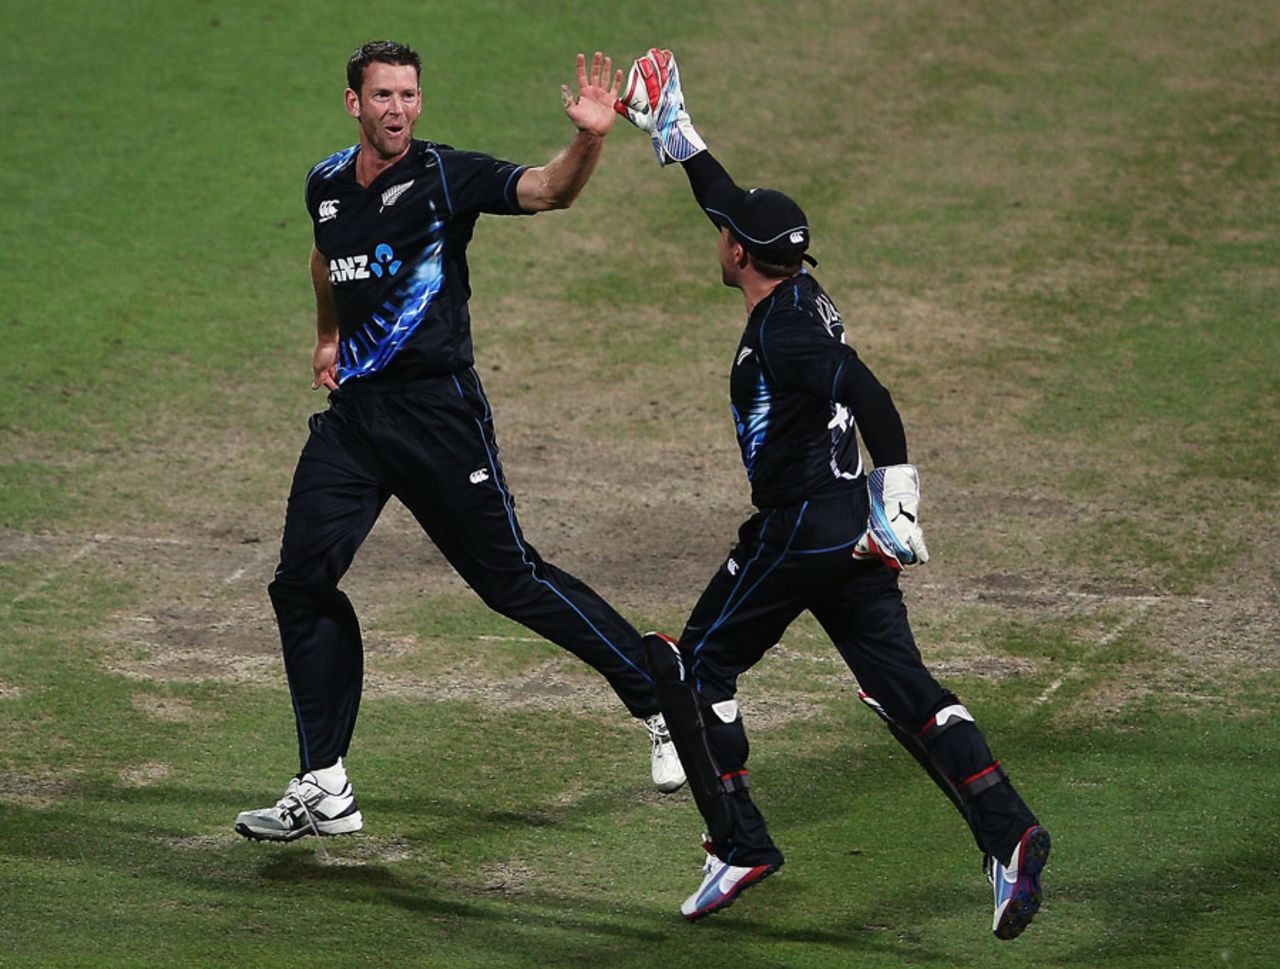 Ian Butler took two wickets on his return to international cricket, New Zealand v England, 2nd T20, Hamilton, February 12, 2013